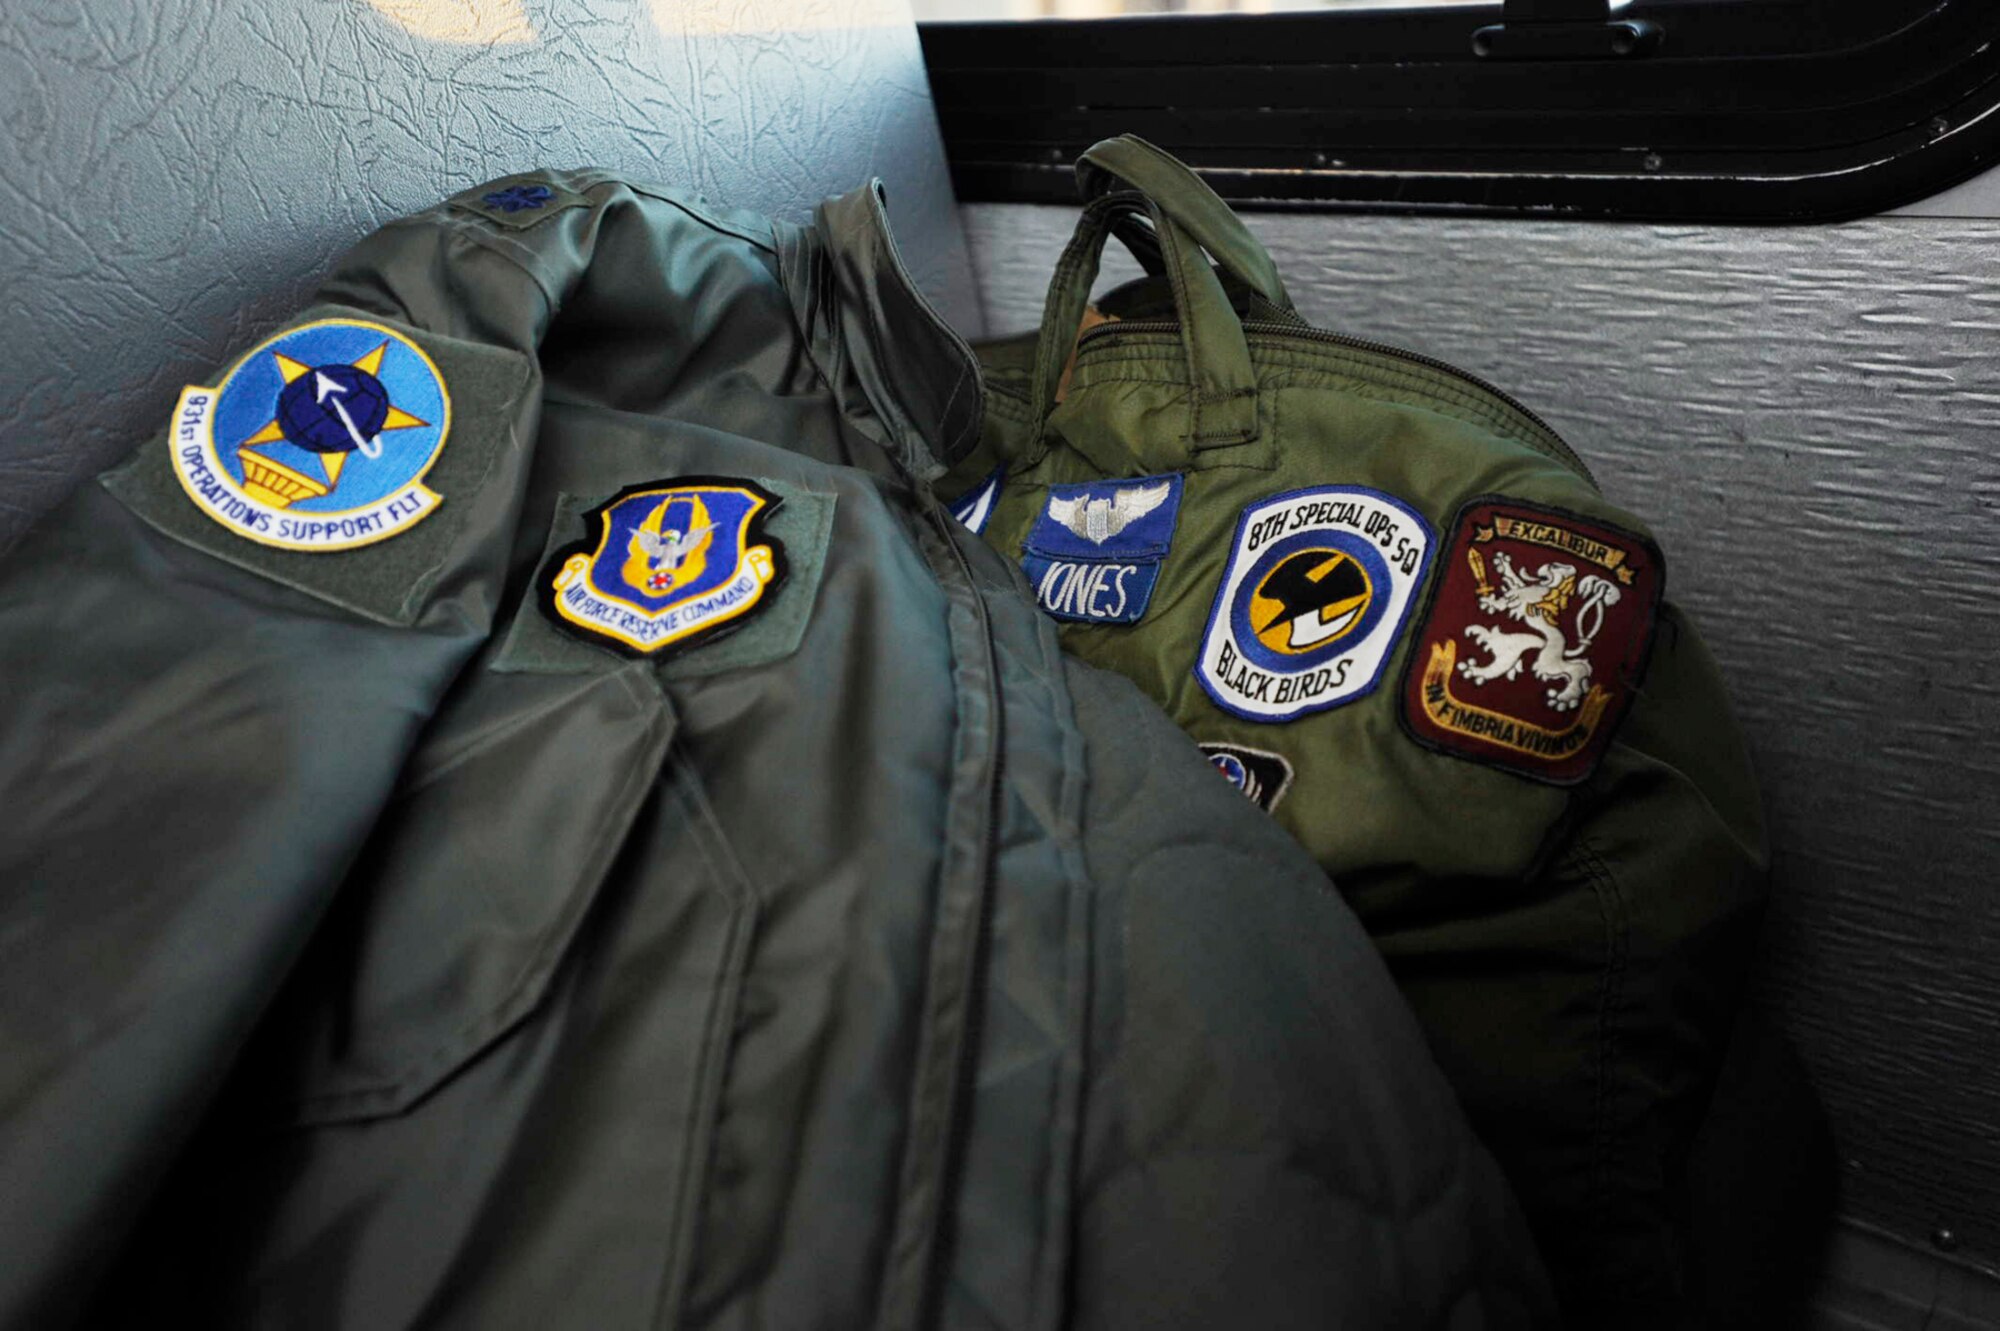 Lt. Col. Barry Jones' jacket and bag sit in an empty bus seat during a trip to the flightline at McConnell Air Force Base, Kan. The patches on his bag represent Colonel Jones' variety of Air Force experience. He was an MC-130 copilot while assigned to the 8th Special Operations Squadron at Hurlburt Field, Fla., from June, 1992, to September, 1993. (U.S. Air Force photo/Tech. Sgt. Jason Schaap)